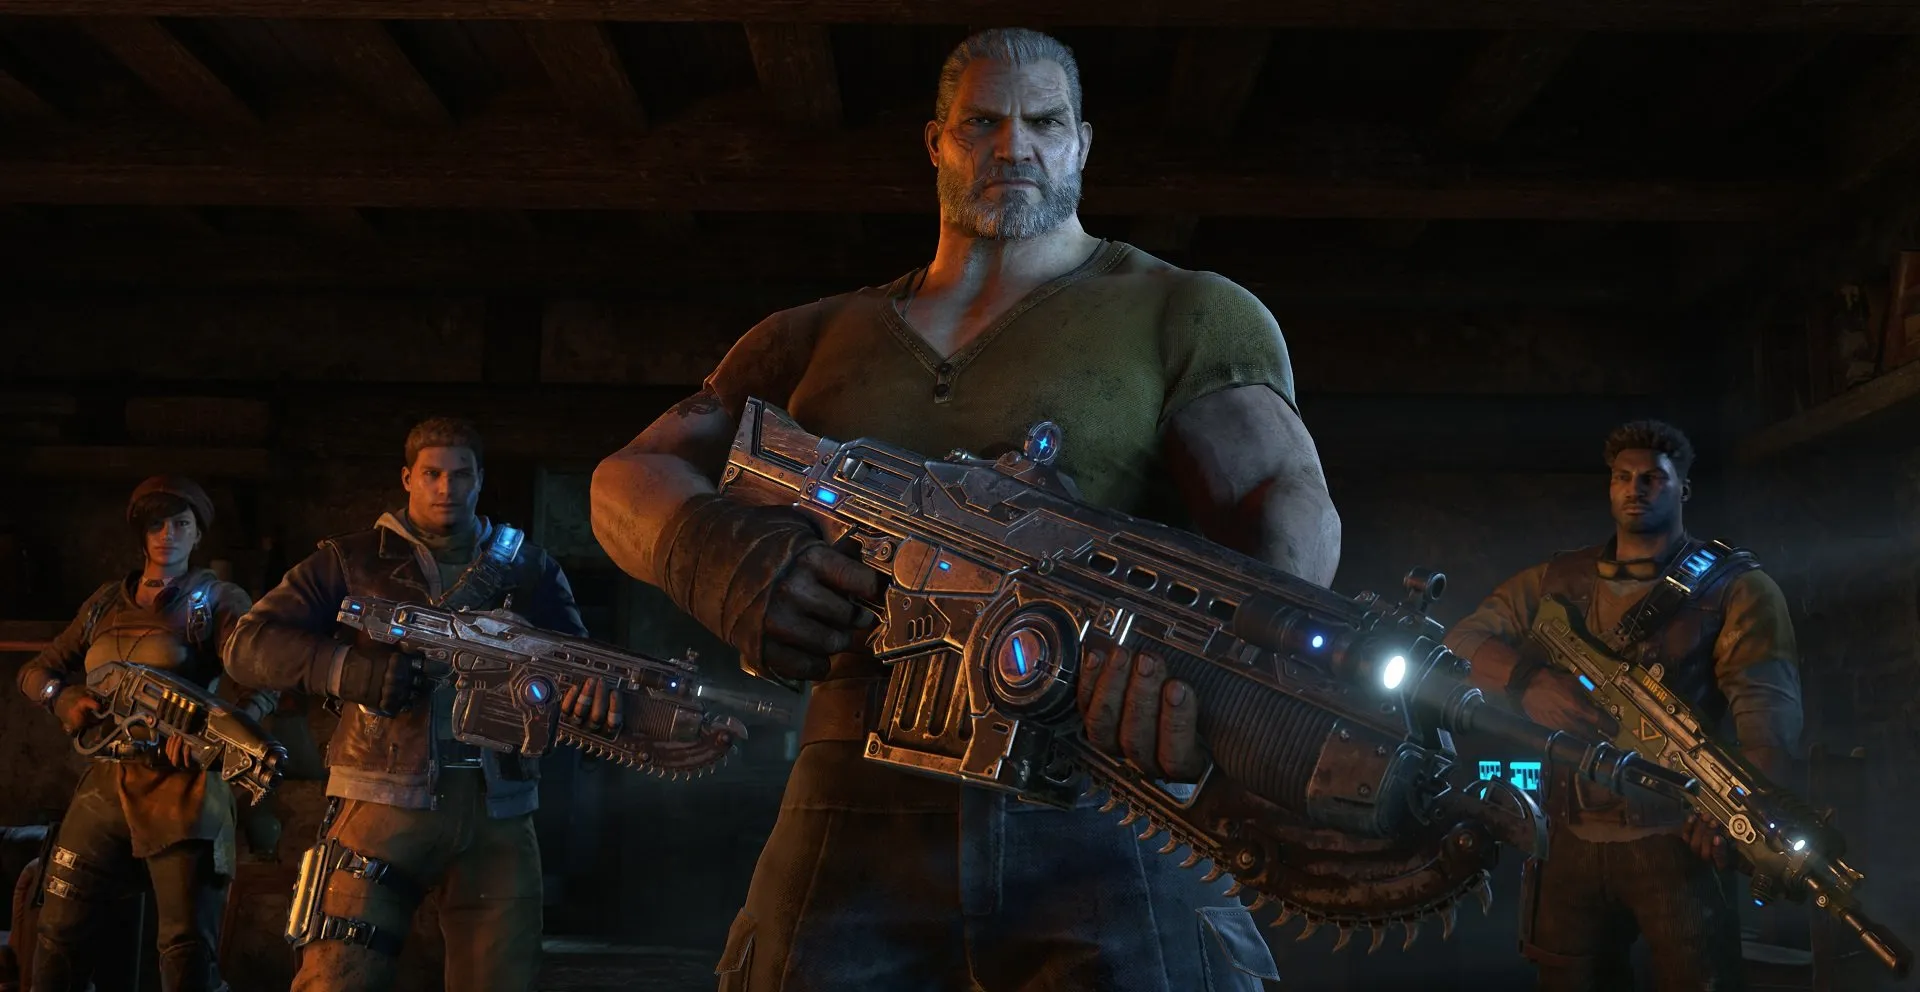 Gears of War 4 campaign review: a thrilling action romp that doesn